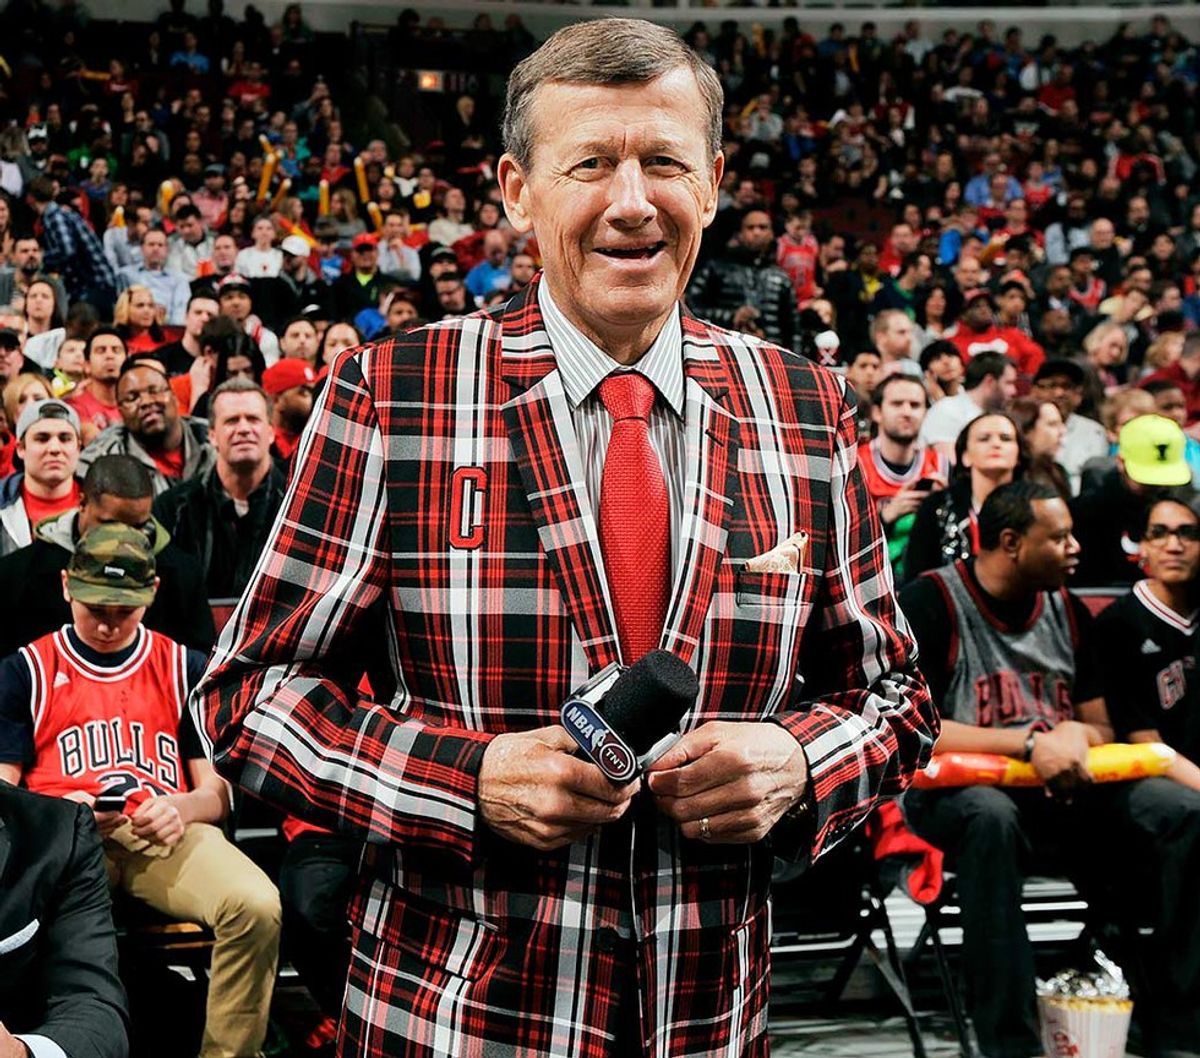 Sager Forever: Why The World Of Sports Will Miss Him